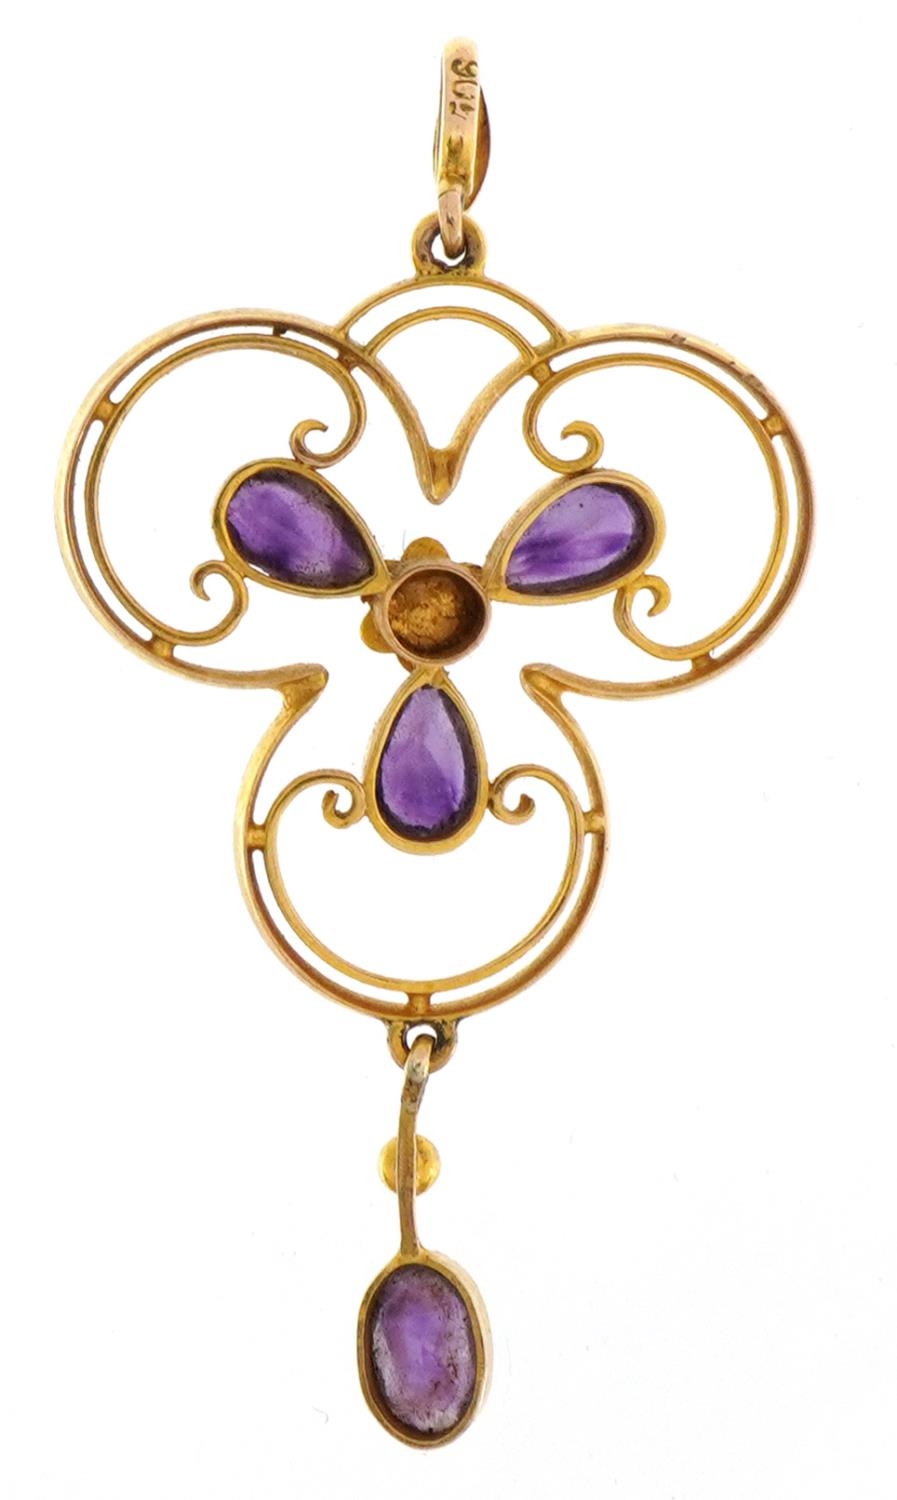 Edwardian 9ct gold amethyst and seed pearl drop pendant, 4.8cm high, 2.8g - Image 2 of 3